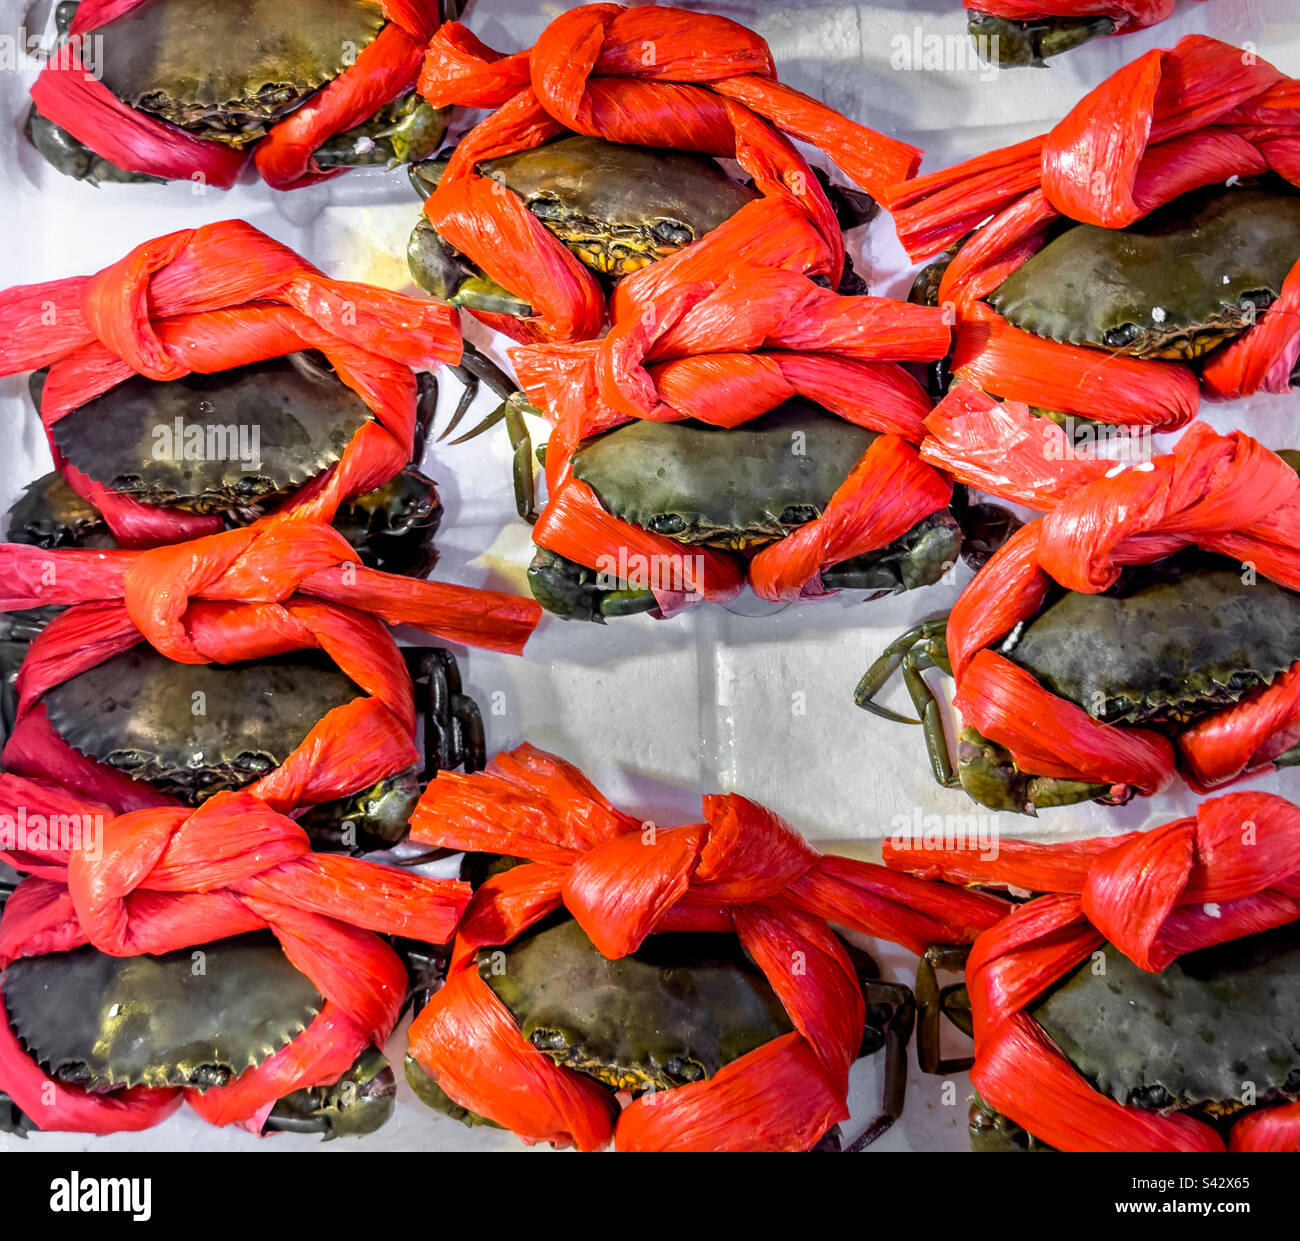 Live crabs dressed up and secured at the local market in Hong Kong Stock Photo